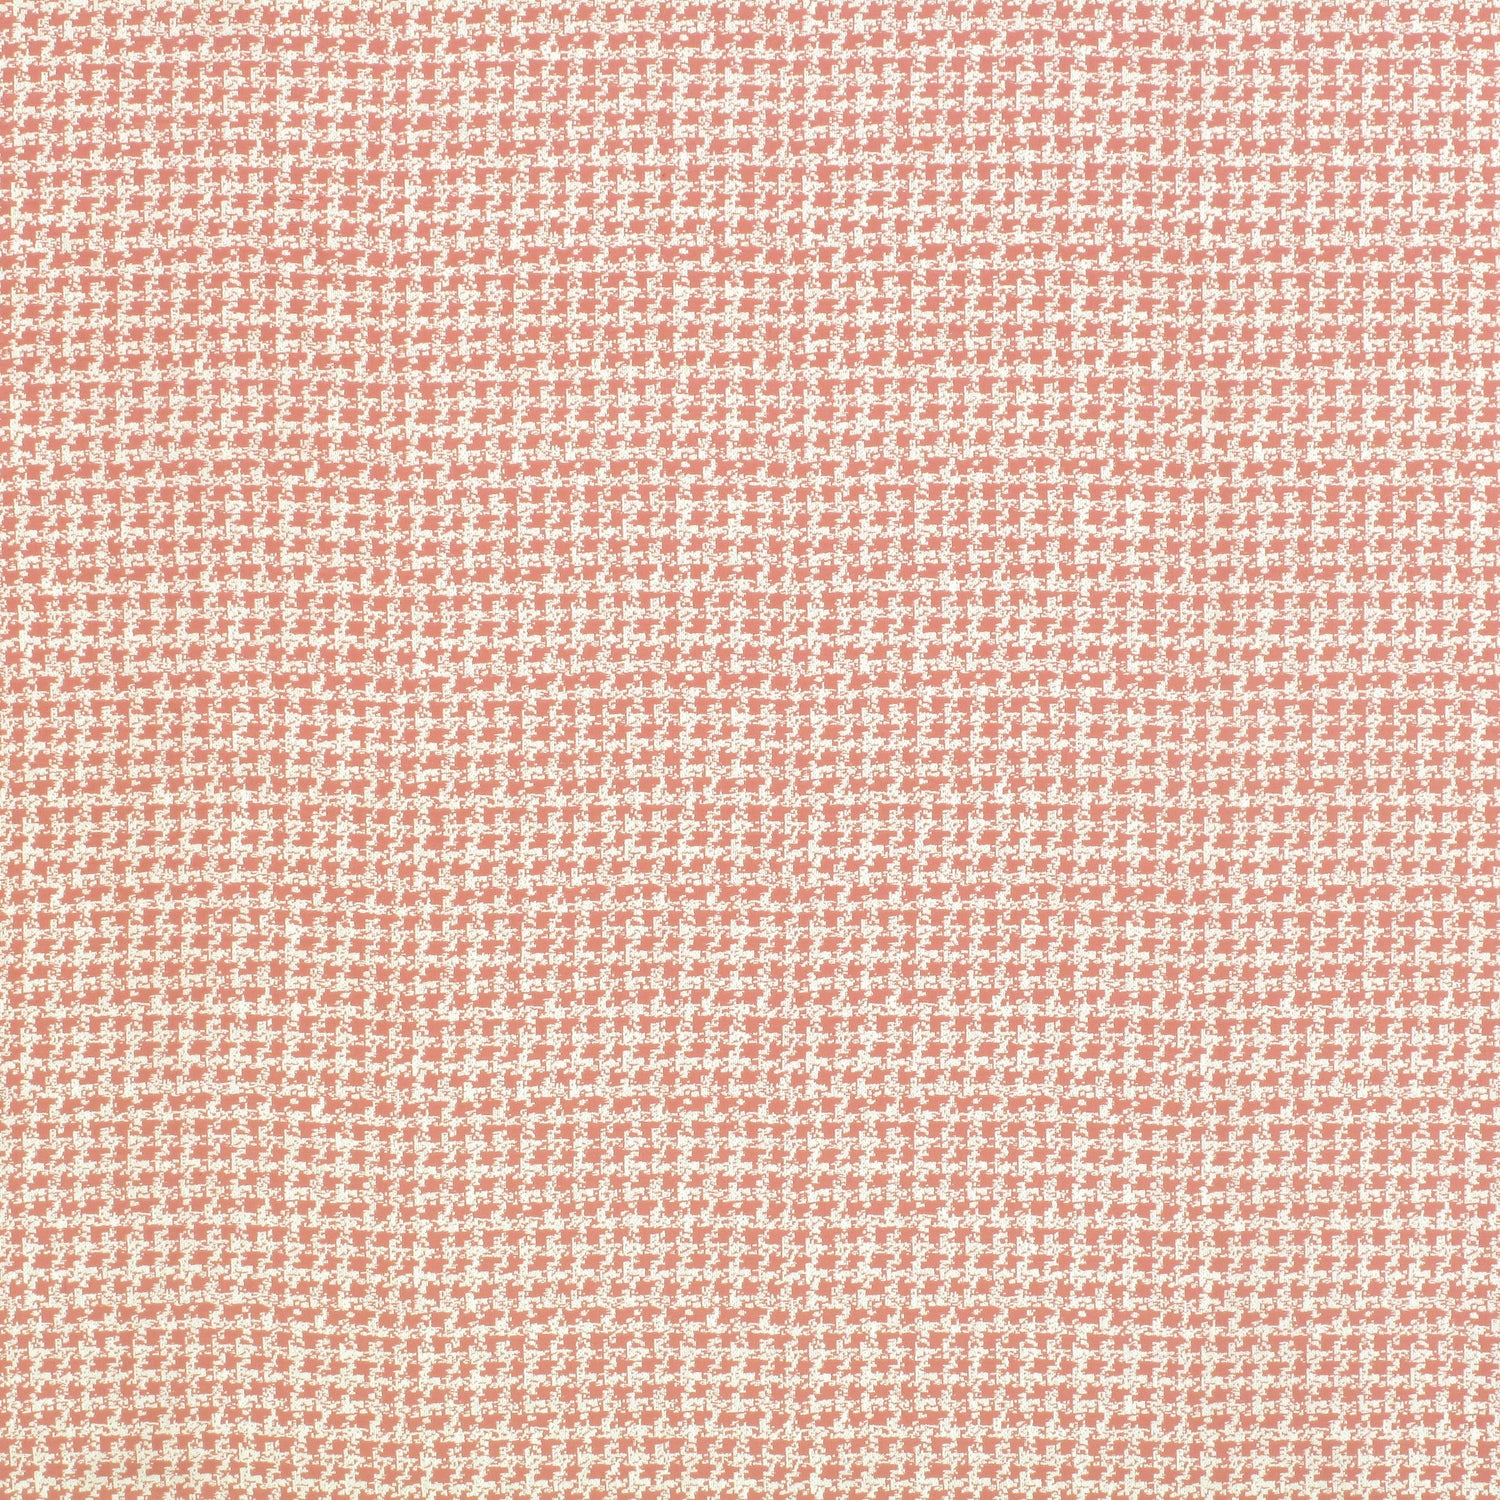 Downton fabric in rose color - pattern number TL 00021393 - by Scalamandre in the Old World Weavers collection